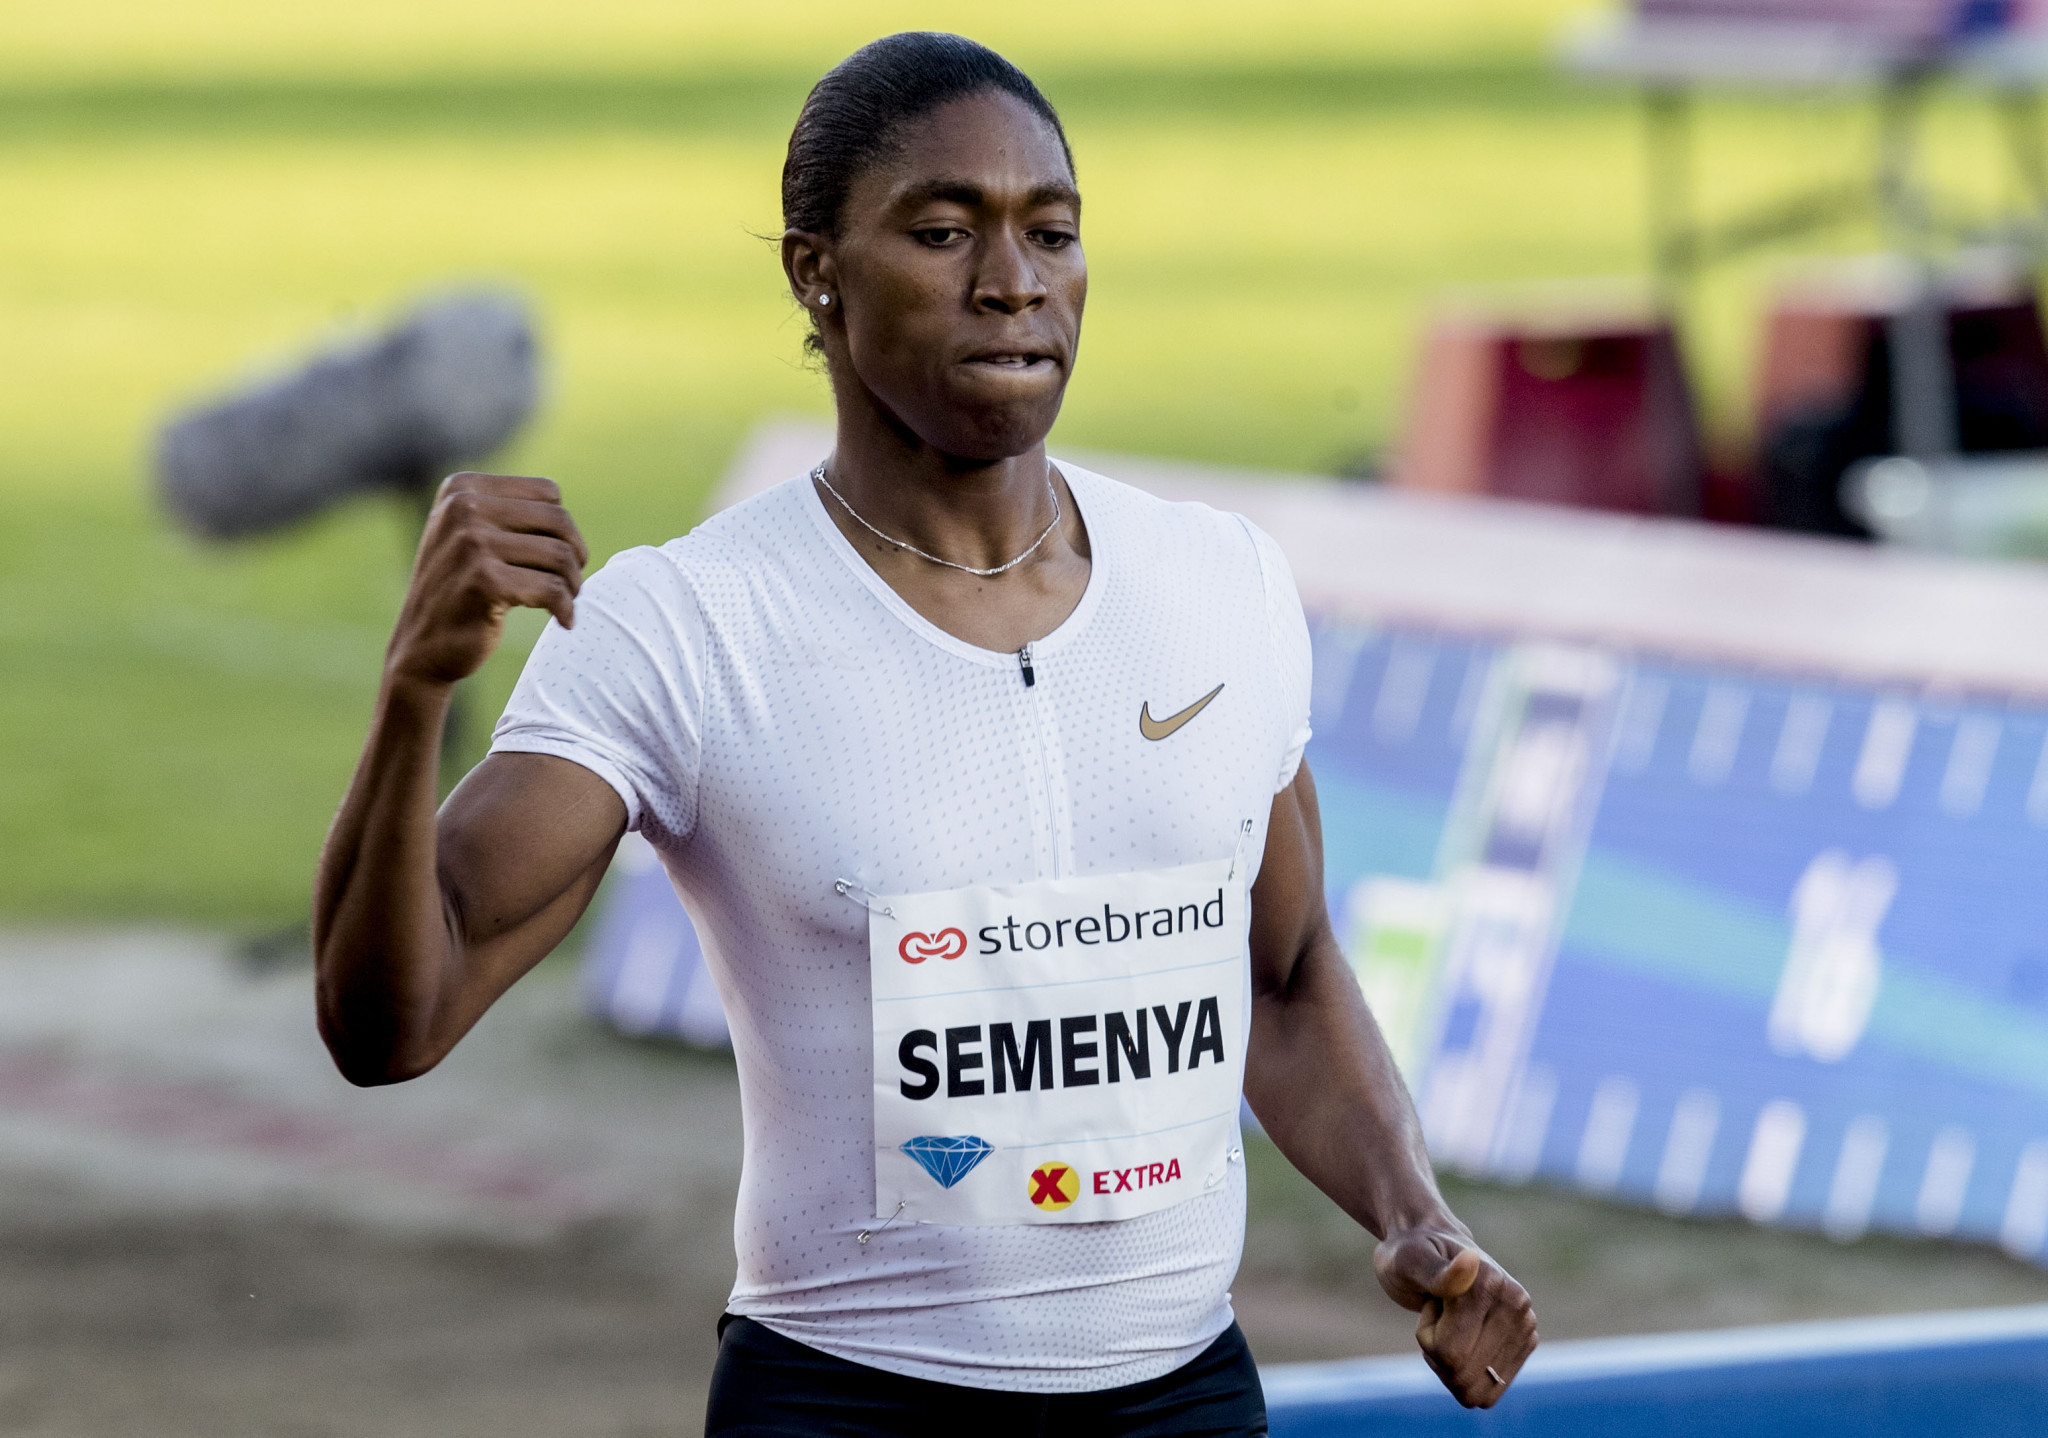 Twenty-seven year old Caster Semenya has launched a legal challenge against the IAAF's new ruling, saying she is entitled to compete the way she was born  ©Getty Images